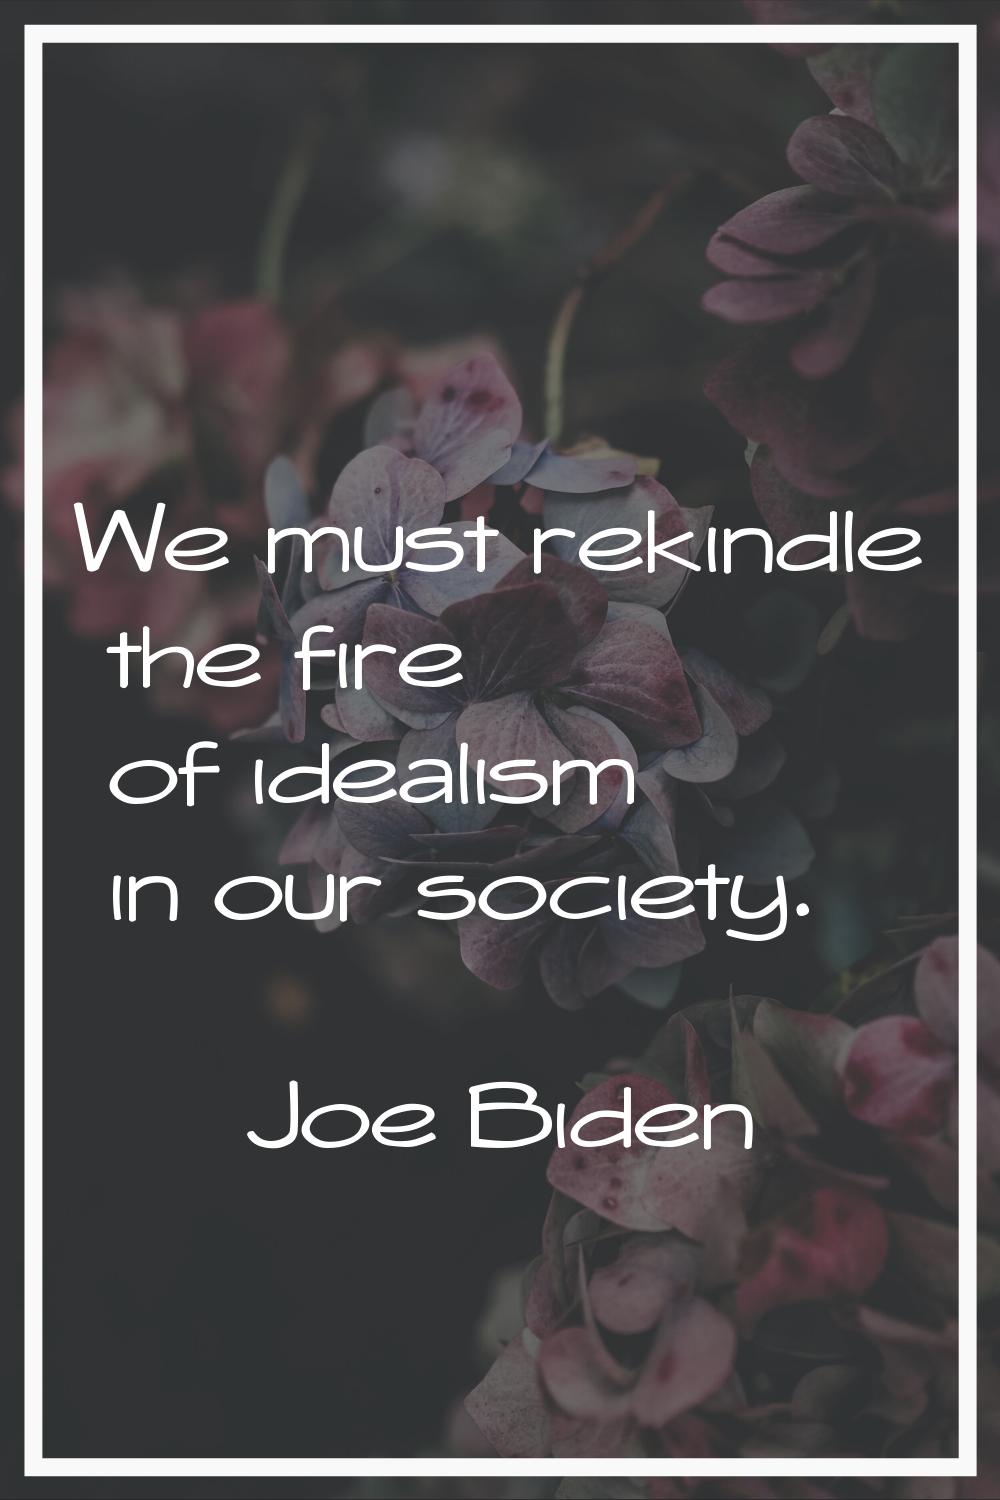 We must rekindle the fire of idealism in our society.